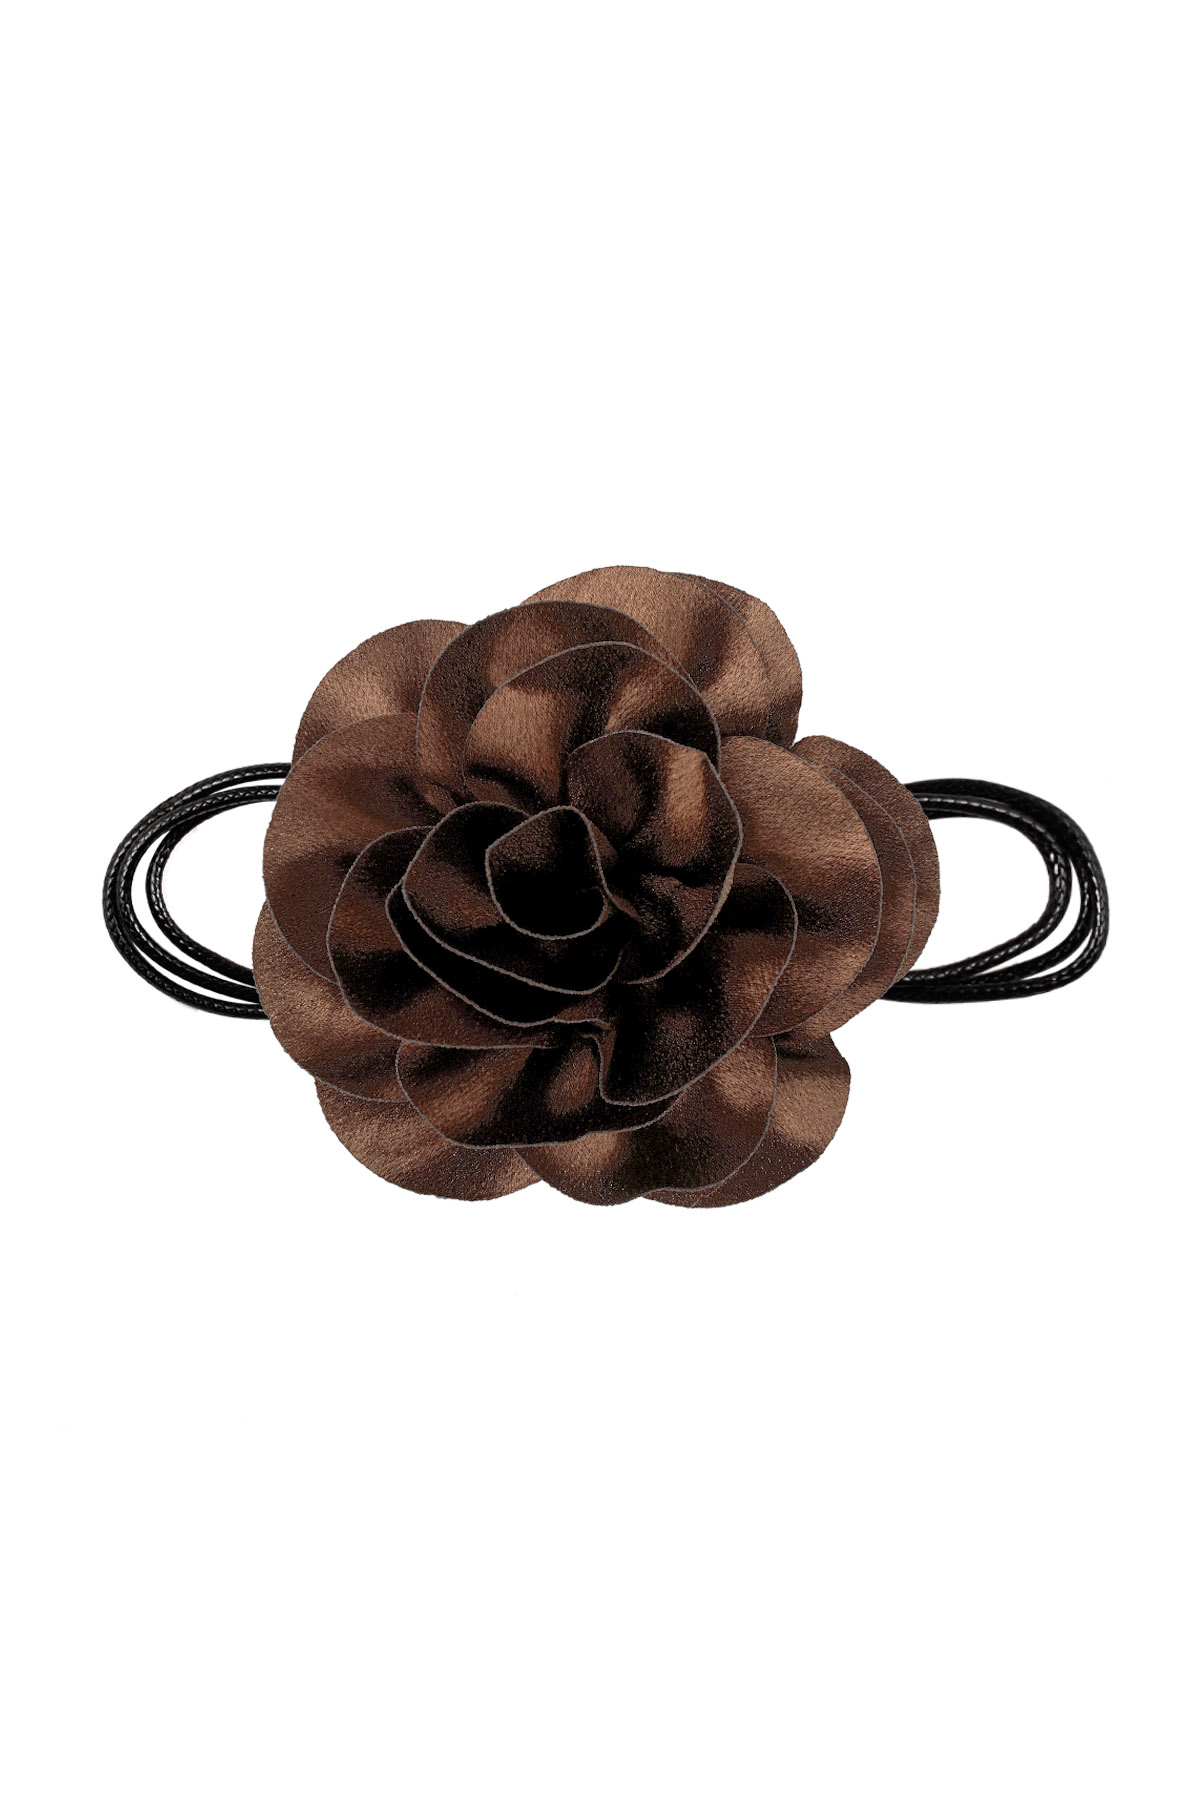 Necklace rope shiny flower - brown h5 